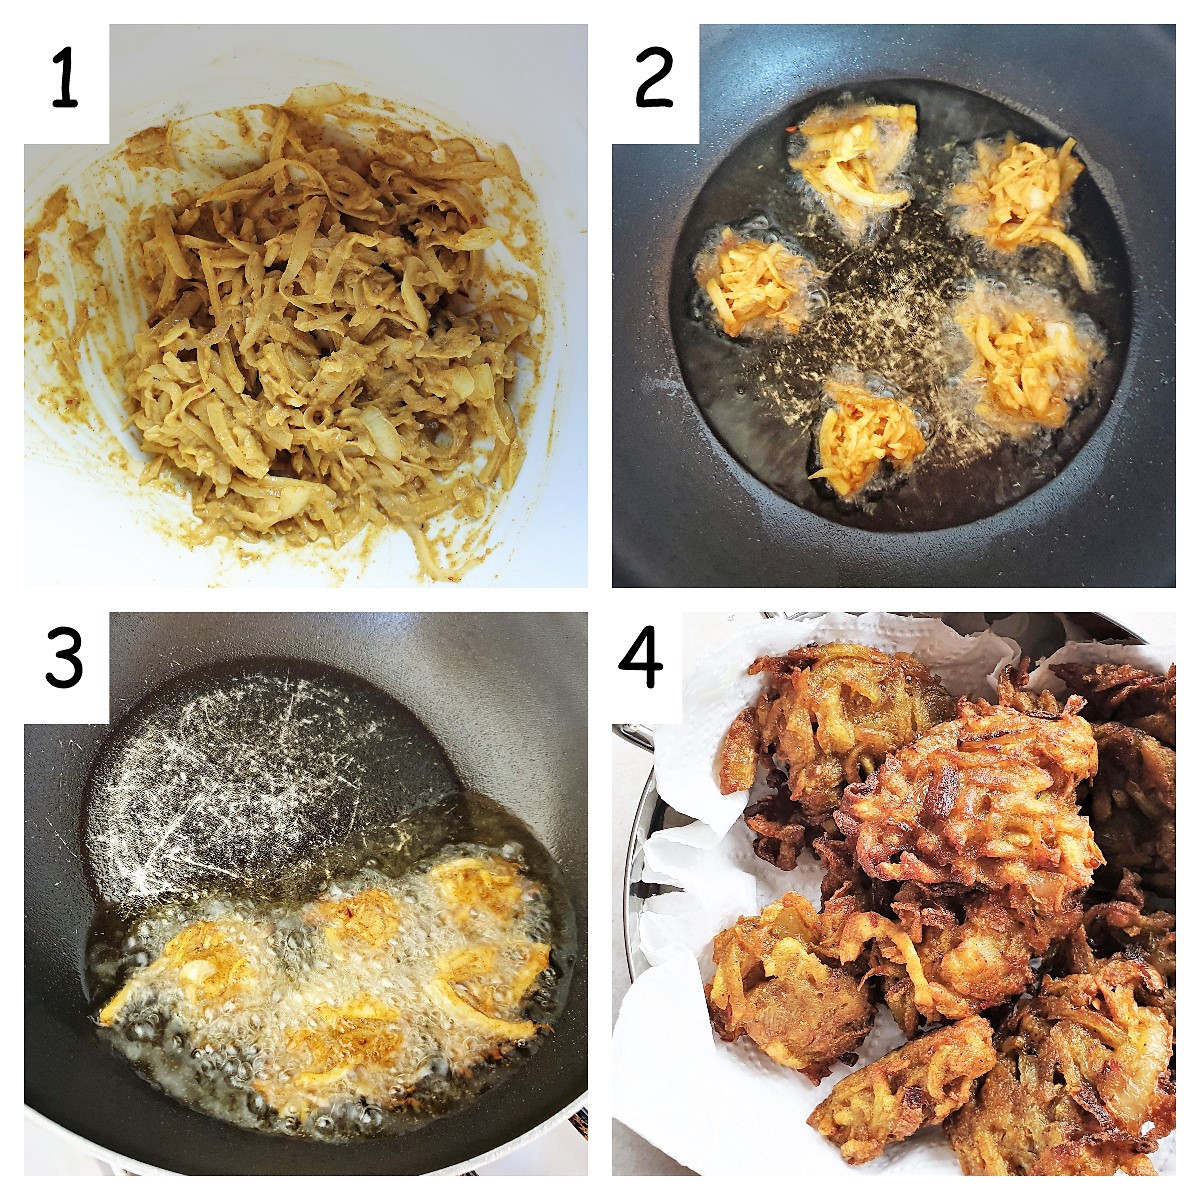 Collage of 4 pictures showing steps for frying potato and onion bhajis.